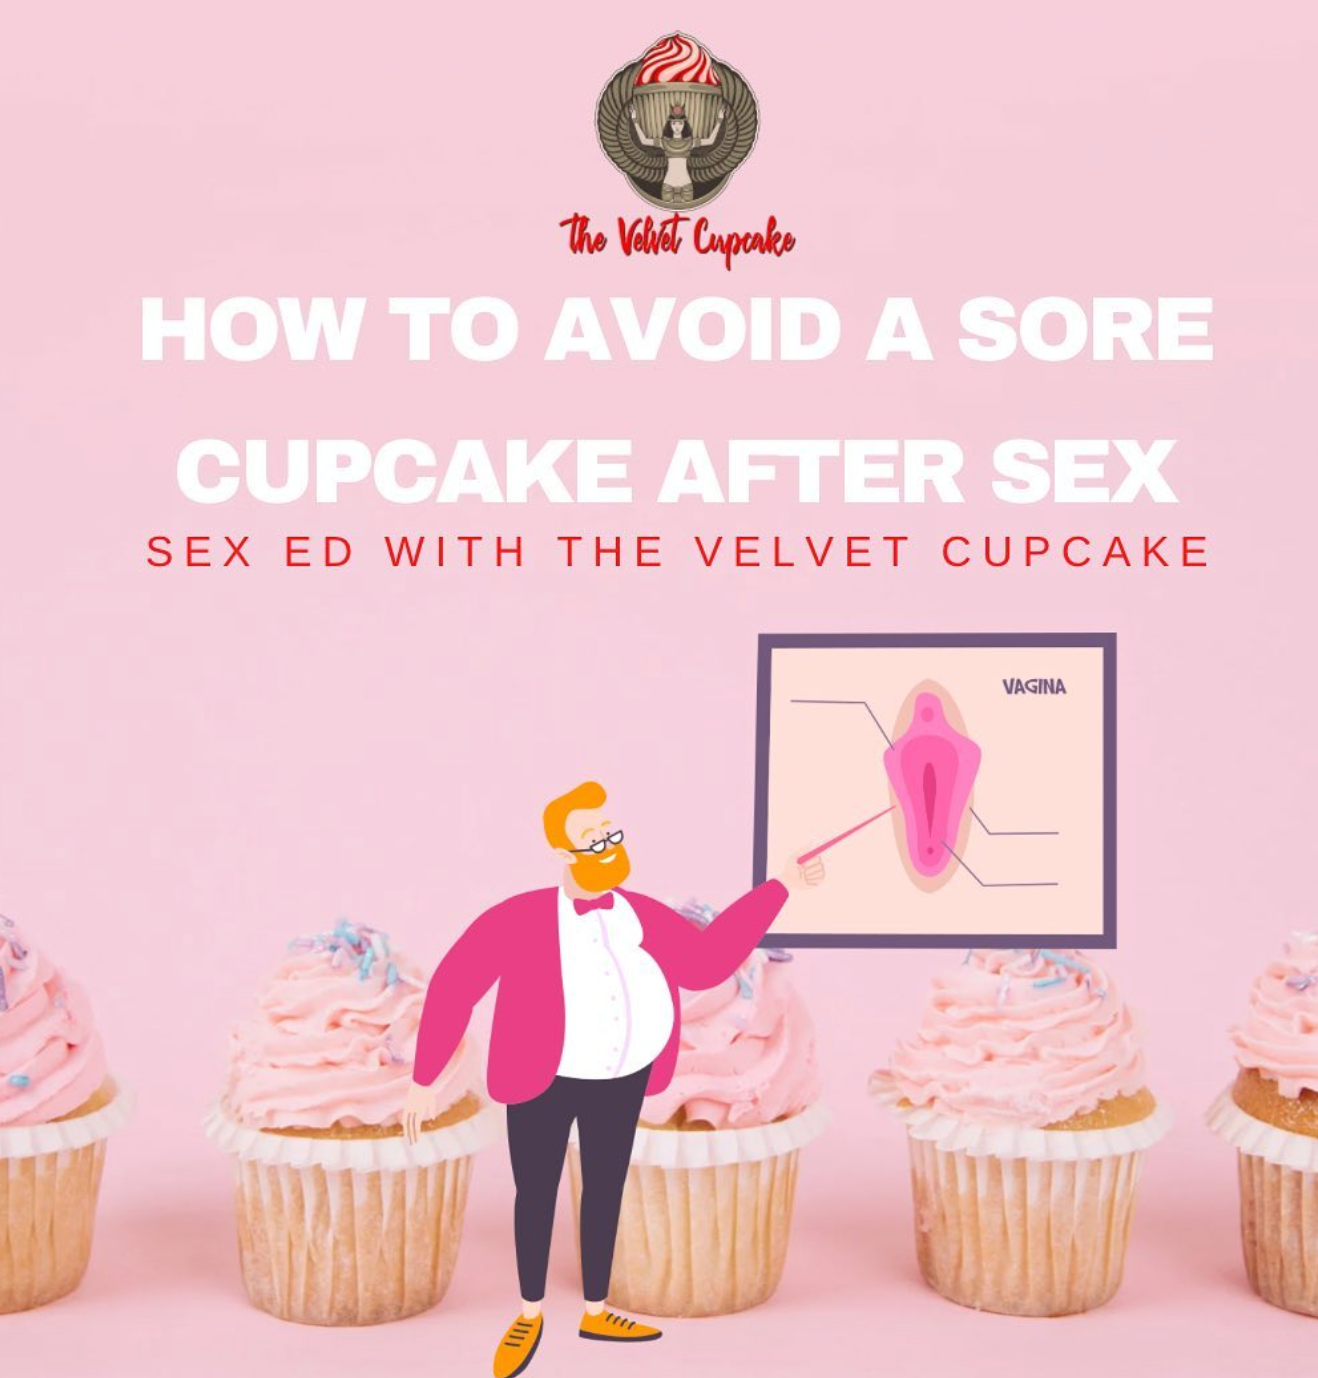 How to avoid a sore cupcake after sex